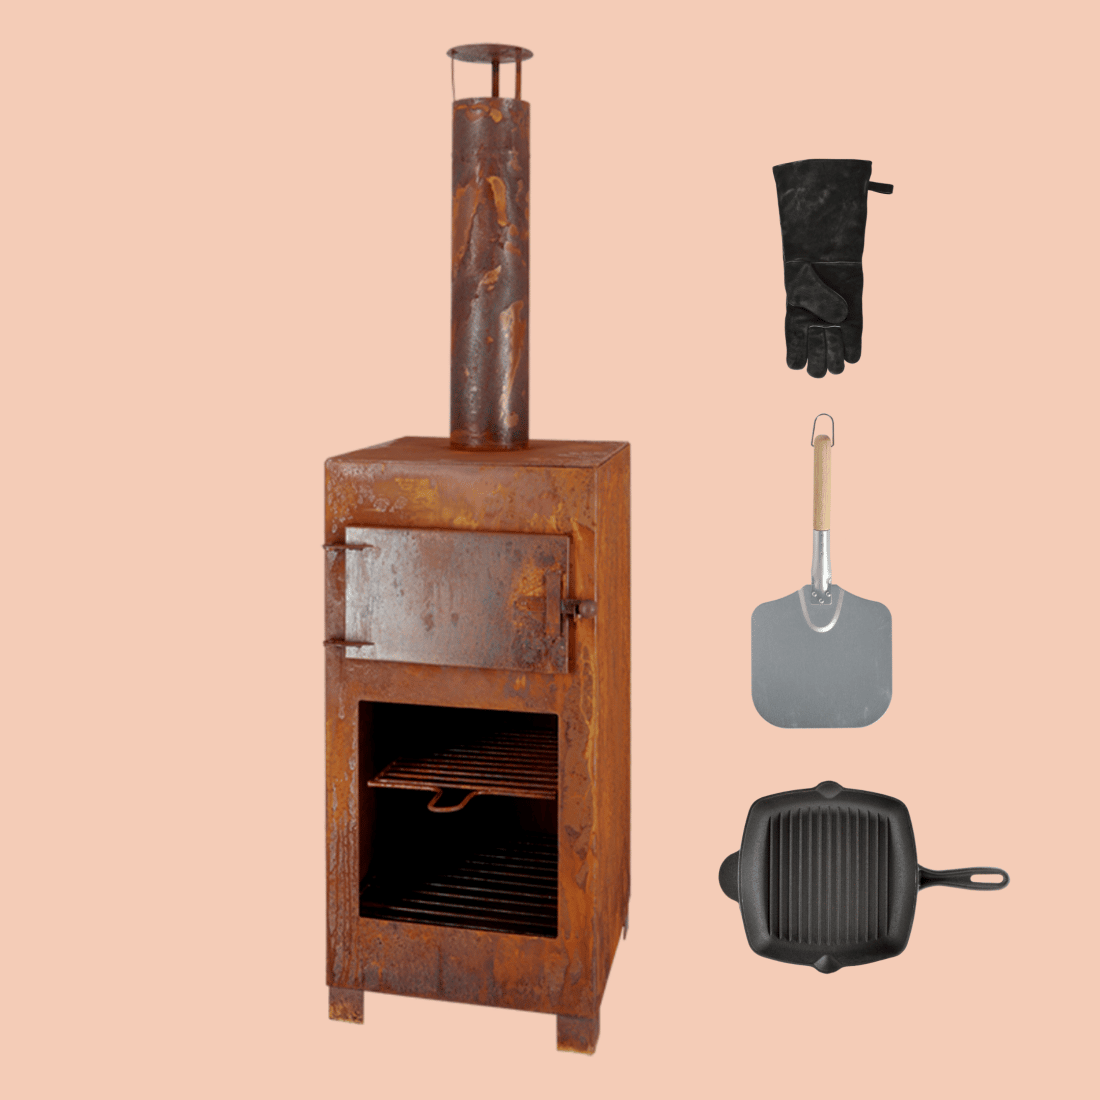 Complete set with Terrace stove with pizza oven pizza scoop Grill pan square and BBQ Glove black